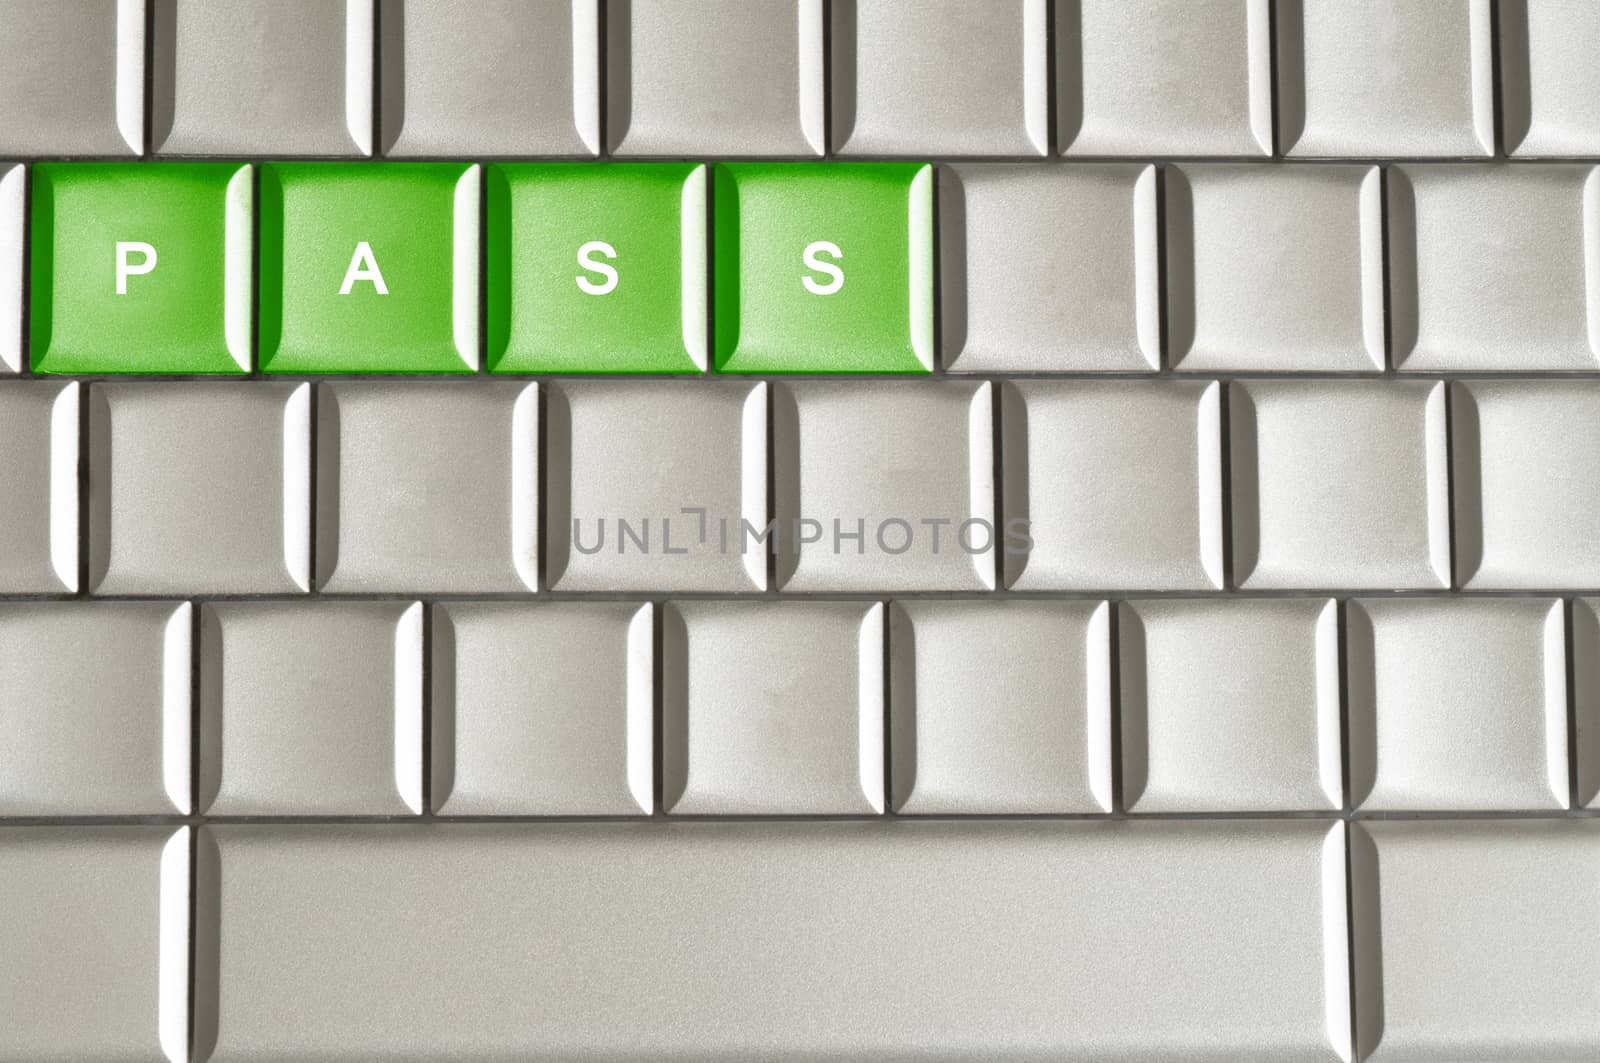 Conceptual word pass isolated  on a keyboard